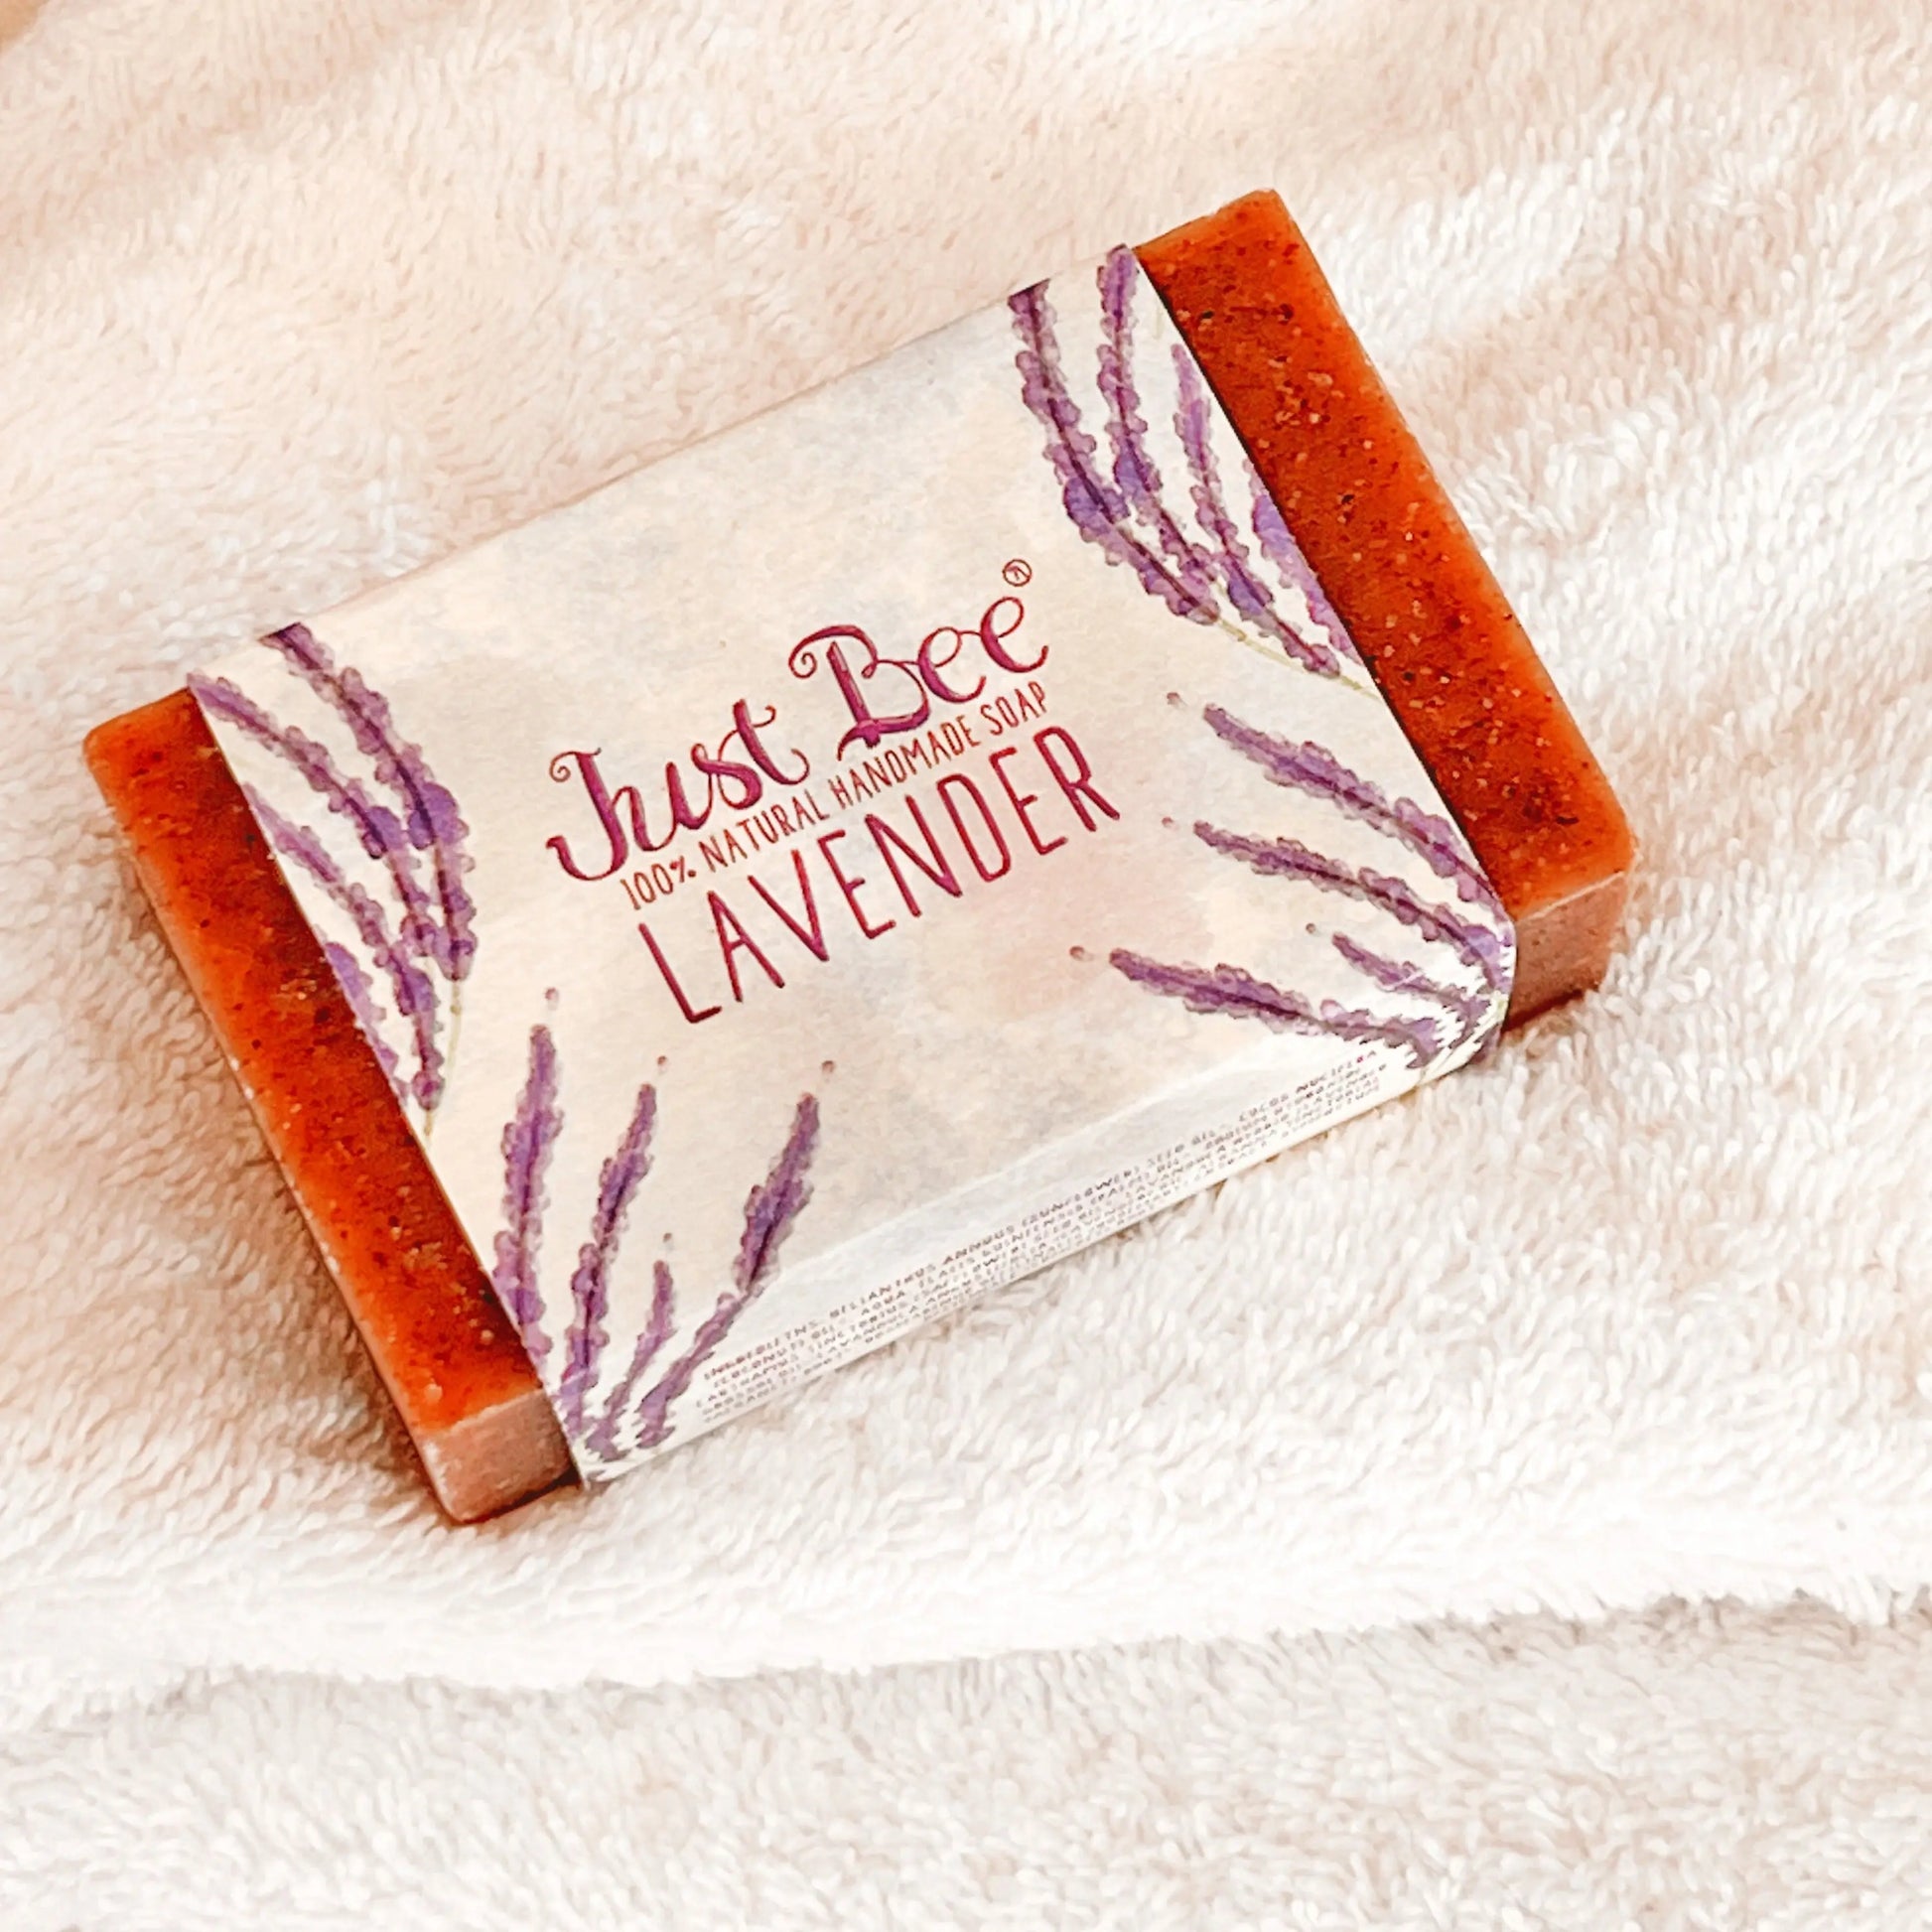 Lavender Soap Just Bee Cosmetics